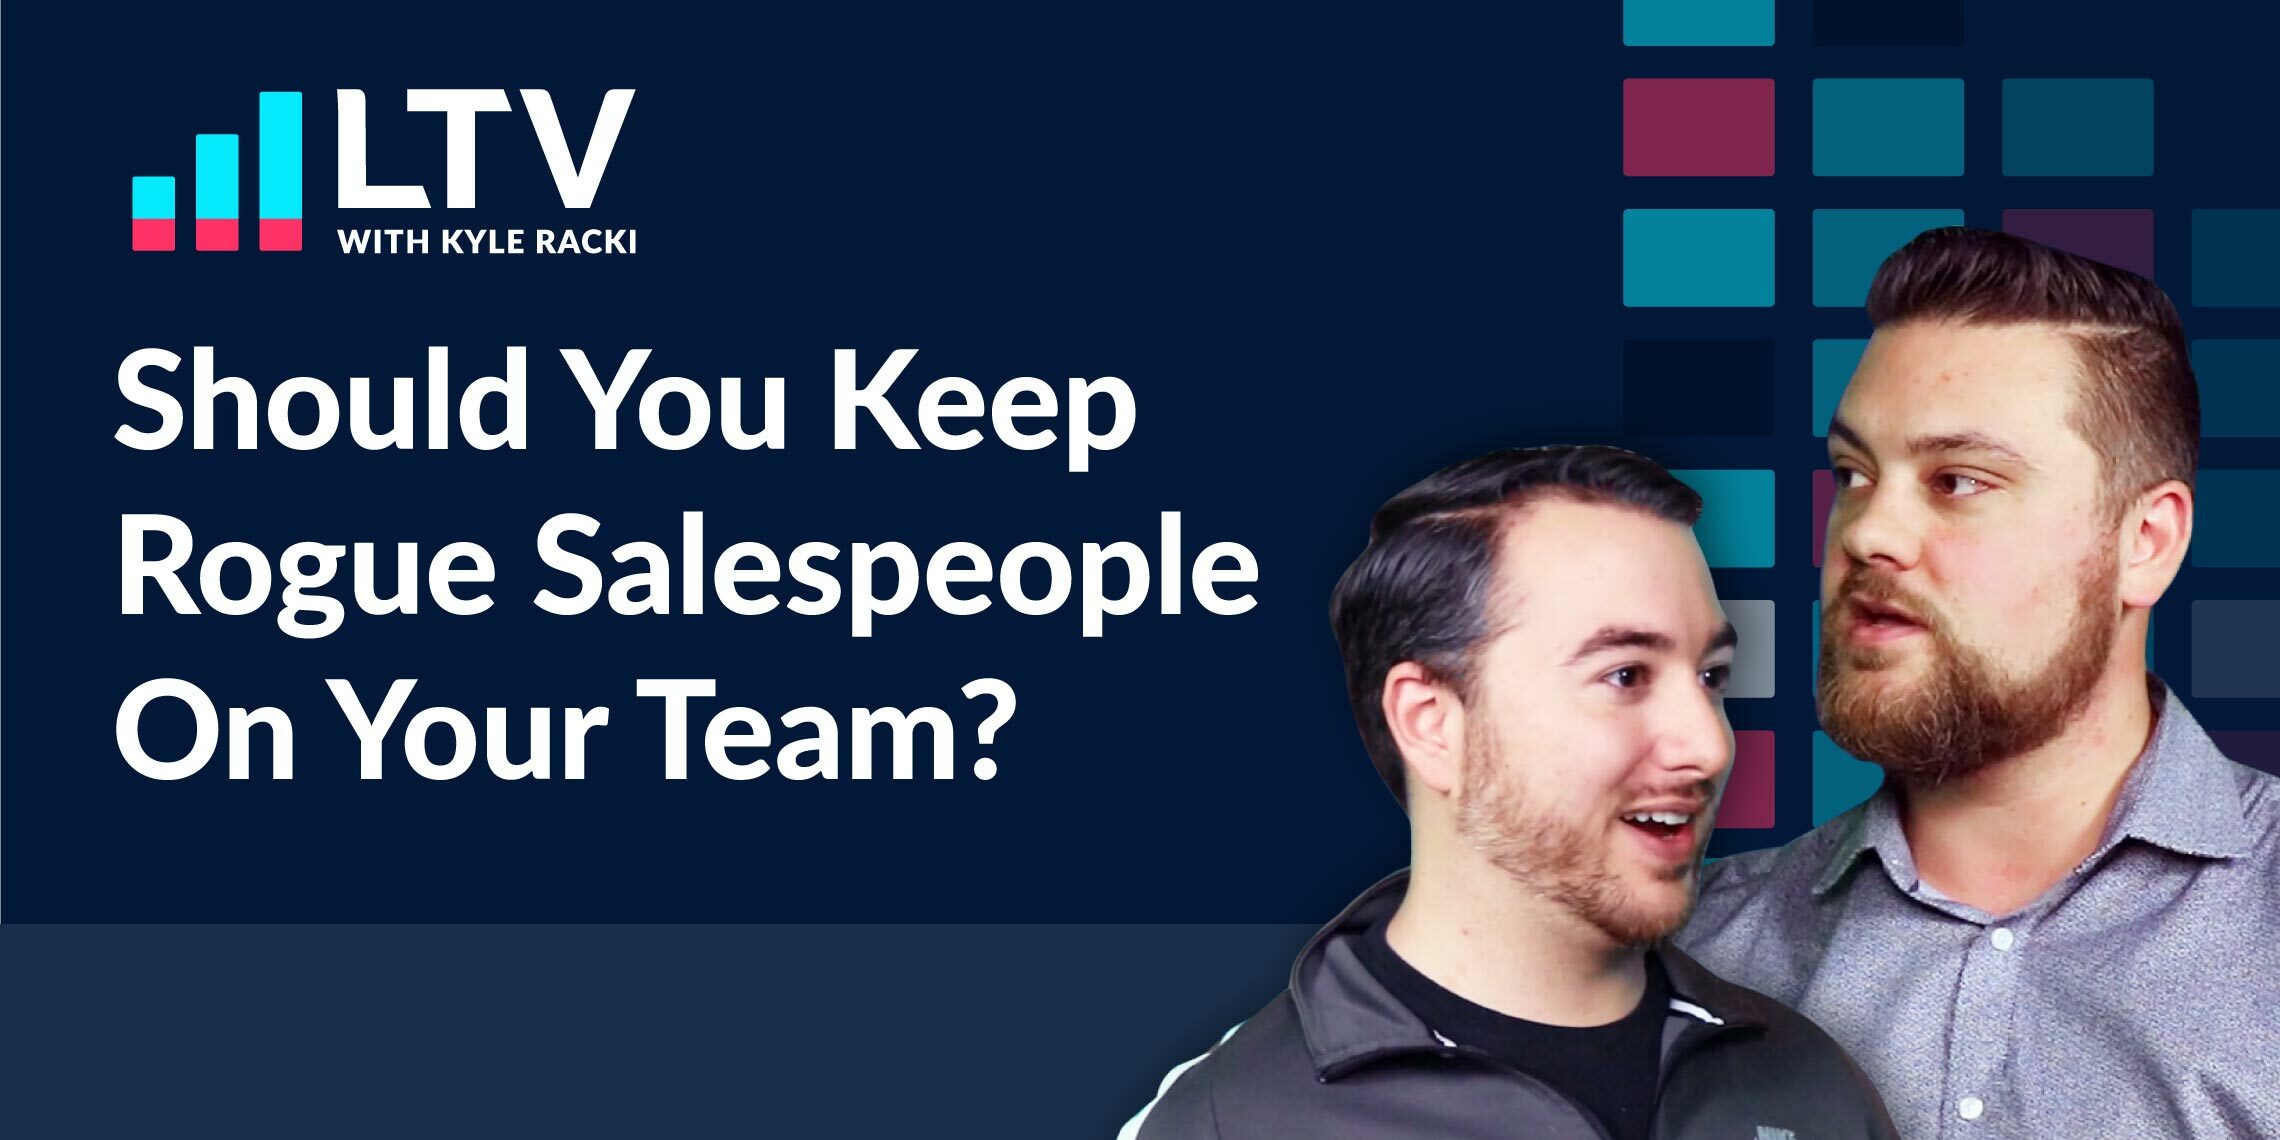 should you keep rogue salespeople on your team?